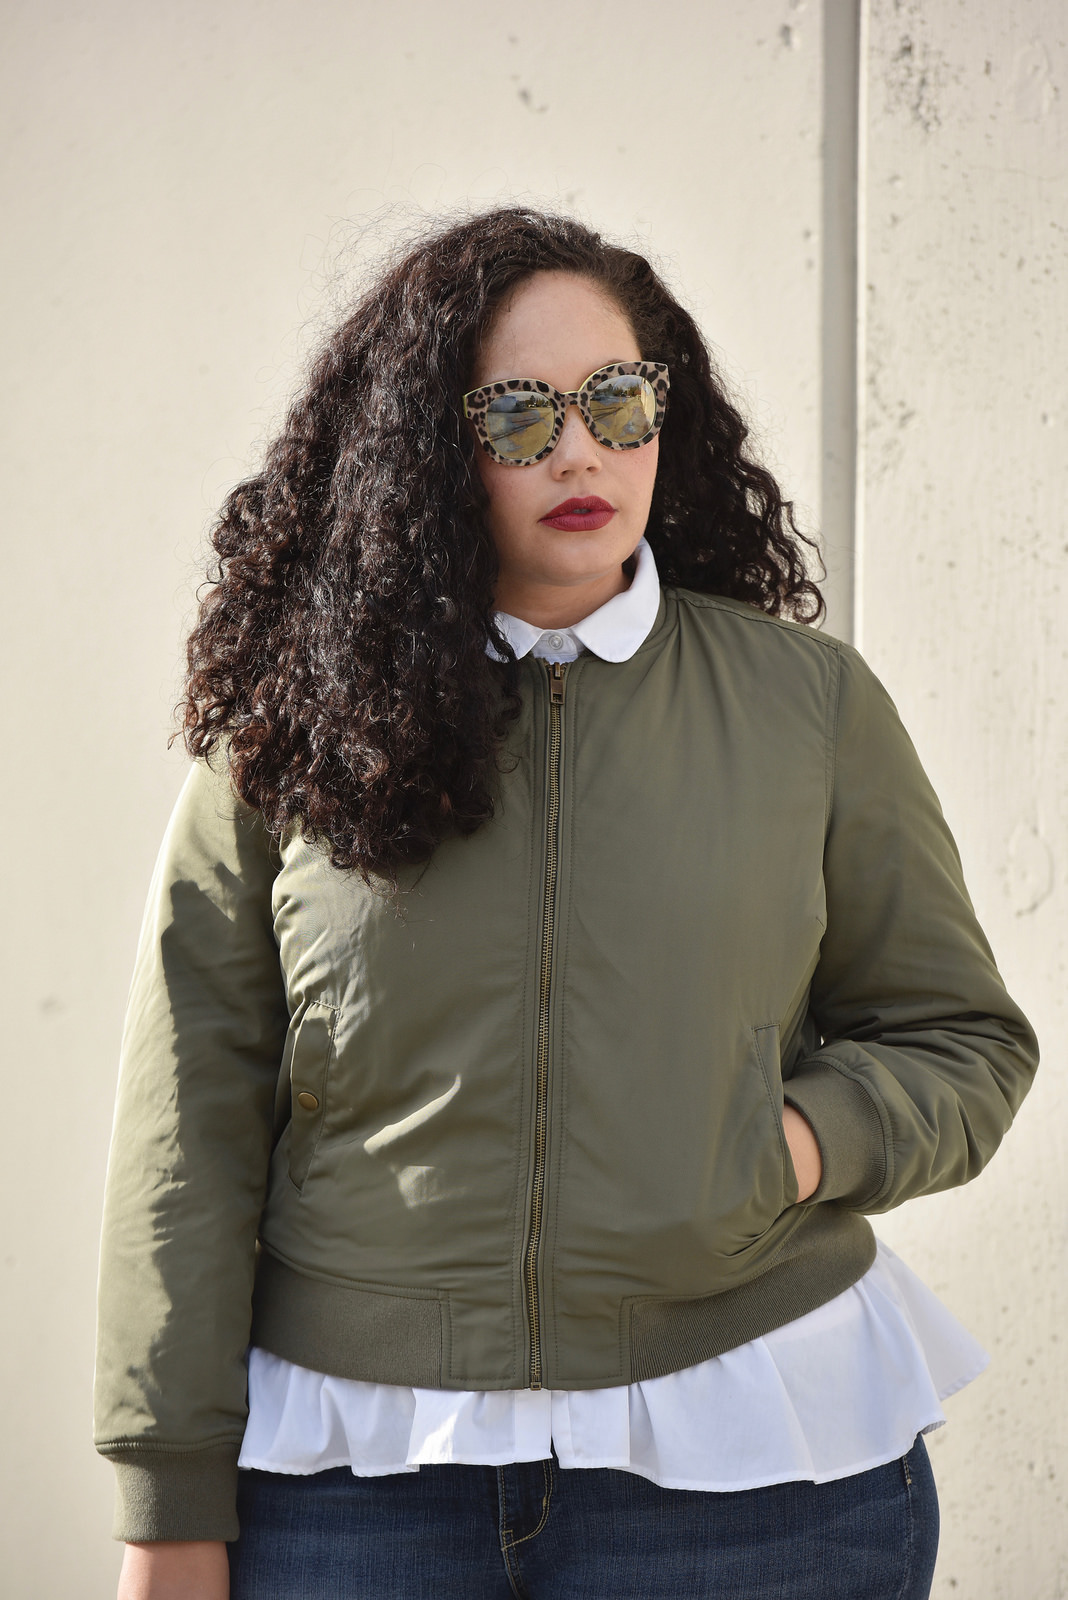 Girl With Curves blogger Tanesha Awasthi wears a satin bomber jacket, peplum top and skinny jeans.